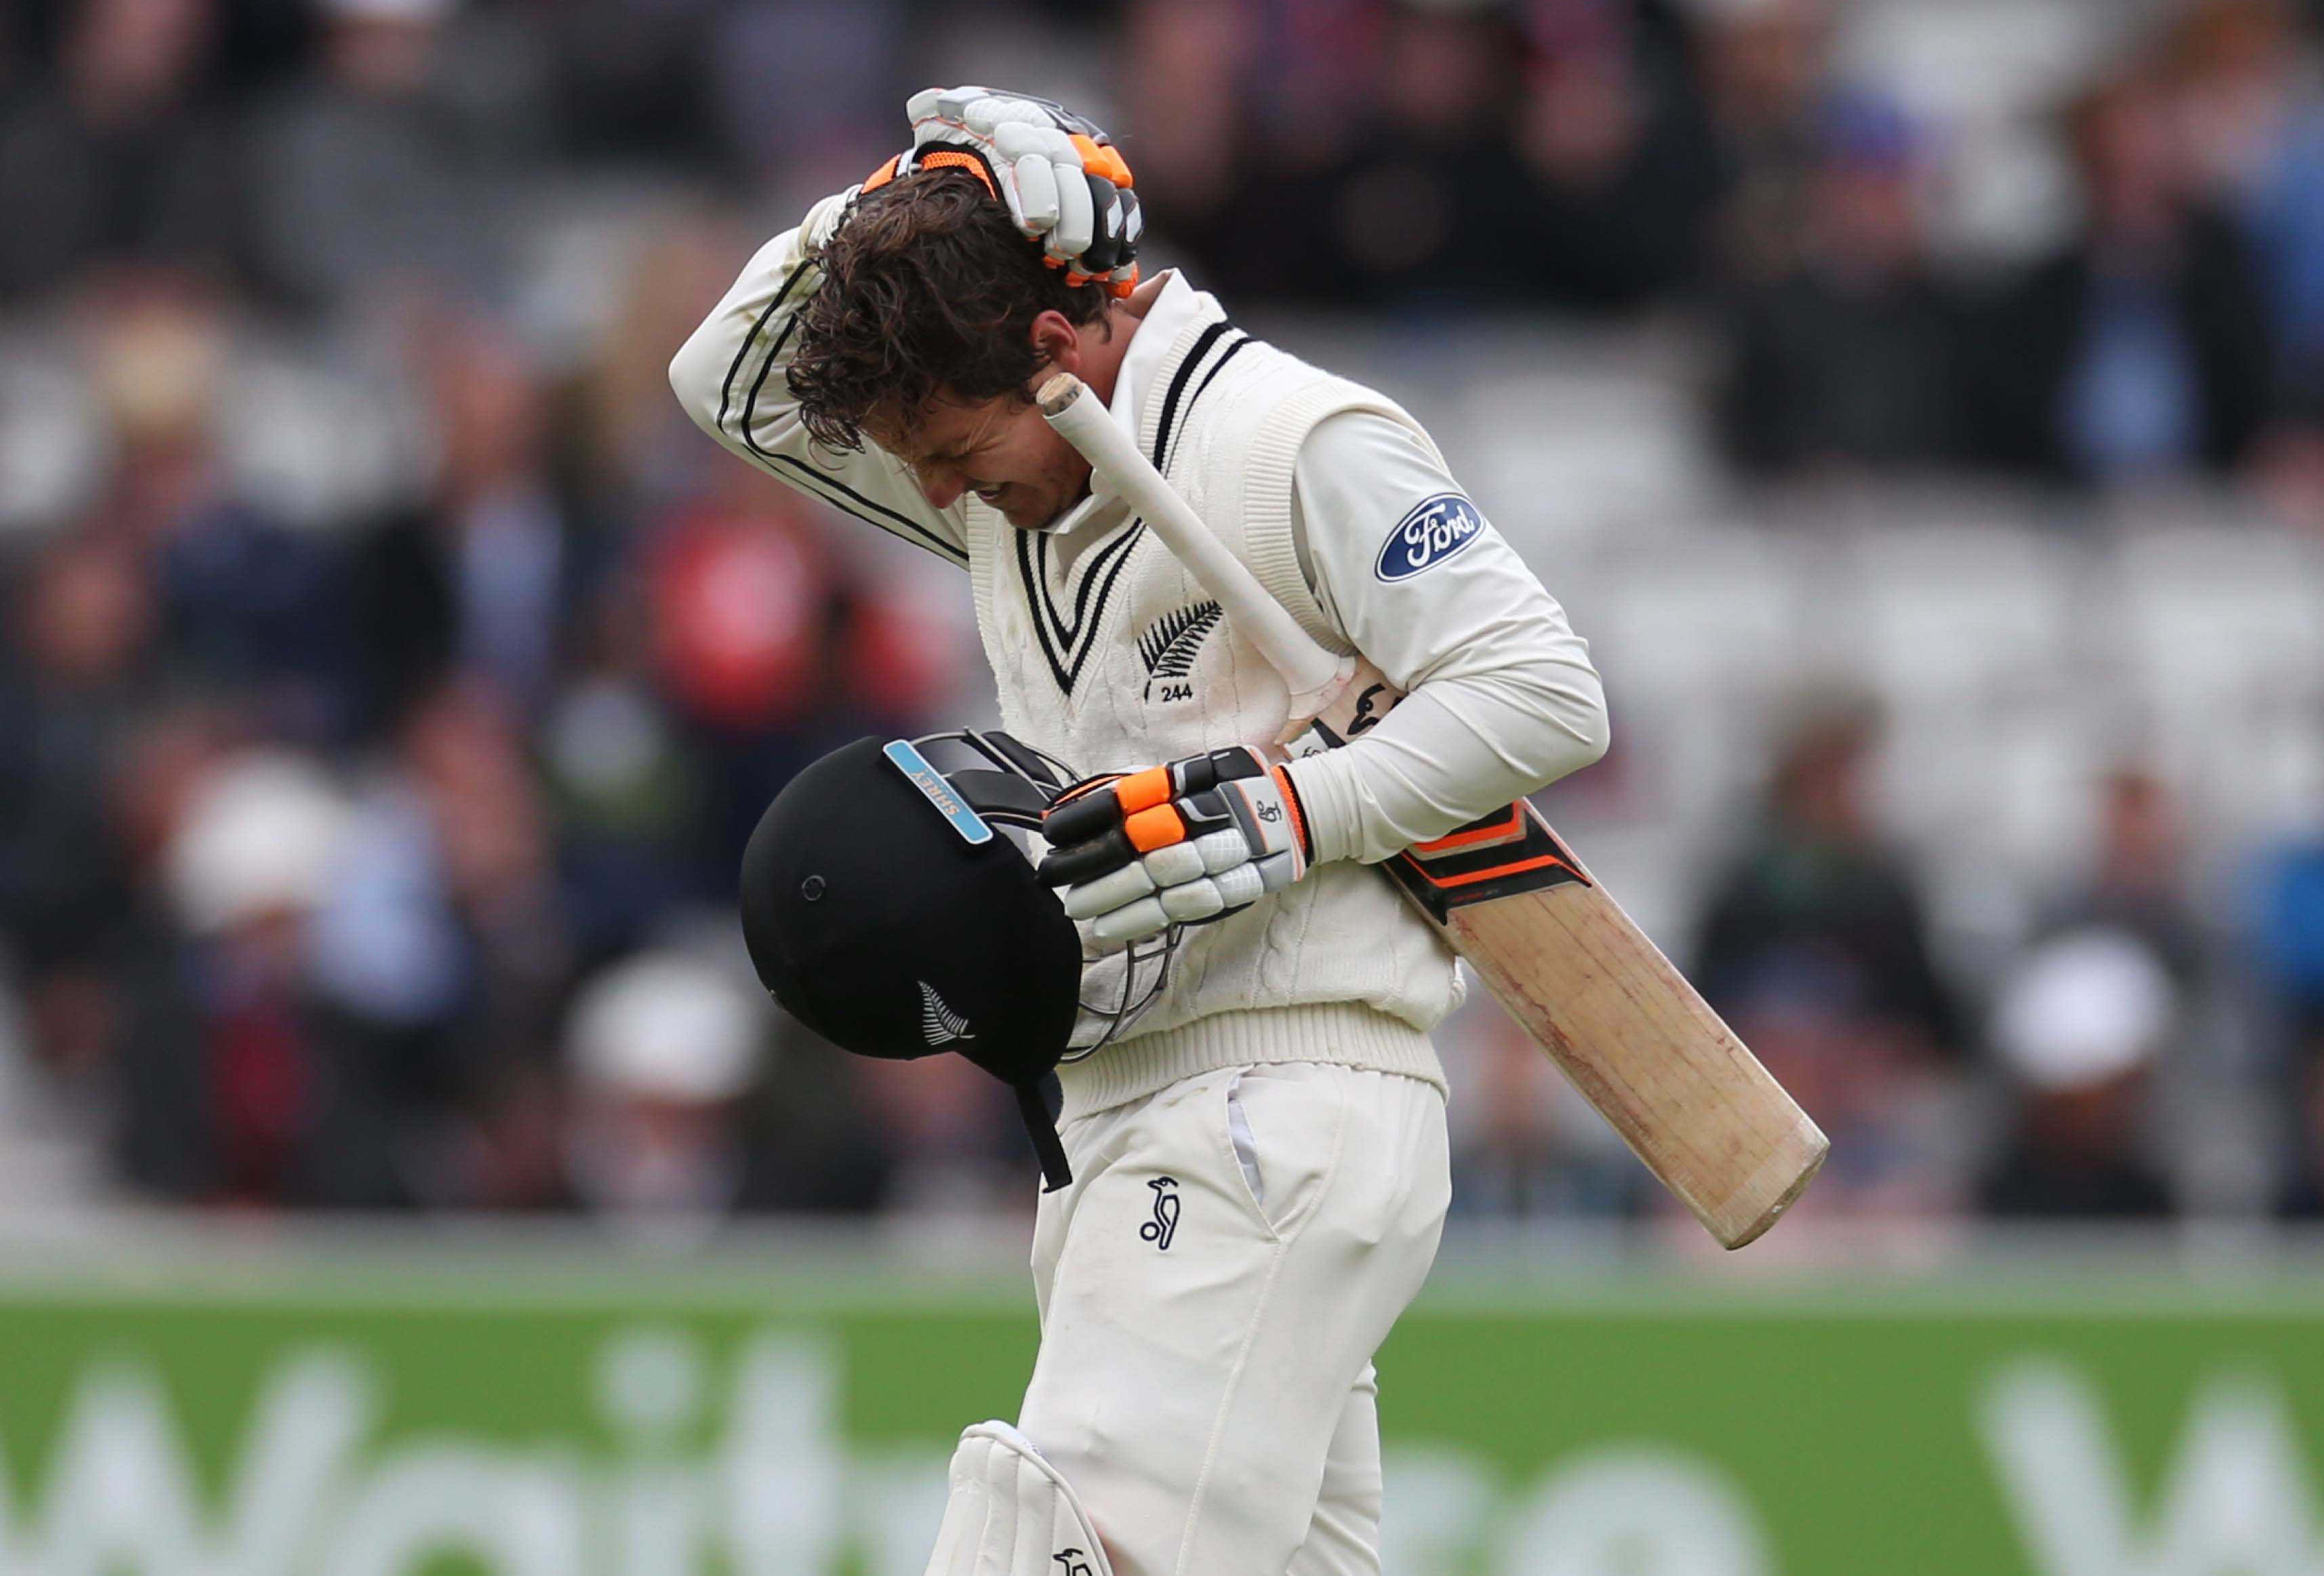 BJ Watling completes a run holding his head after being hit by a Mark Wood delivery during the first Investec Test Match between England and New Zealand at Lord's Cricket Ground, London.